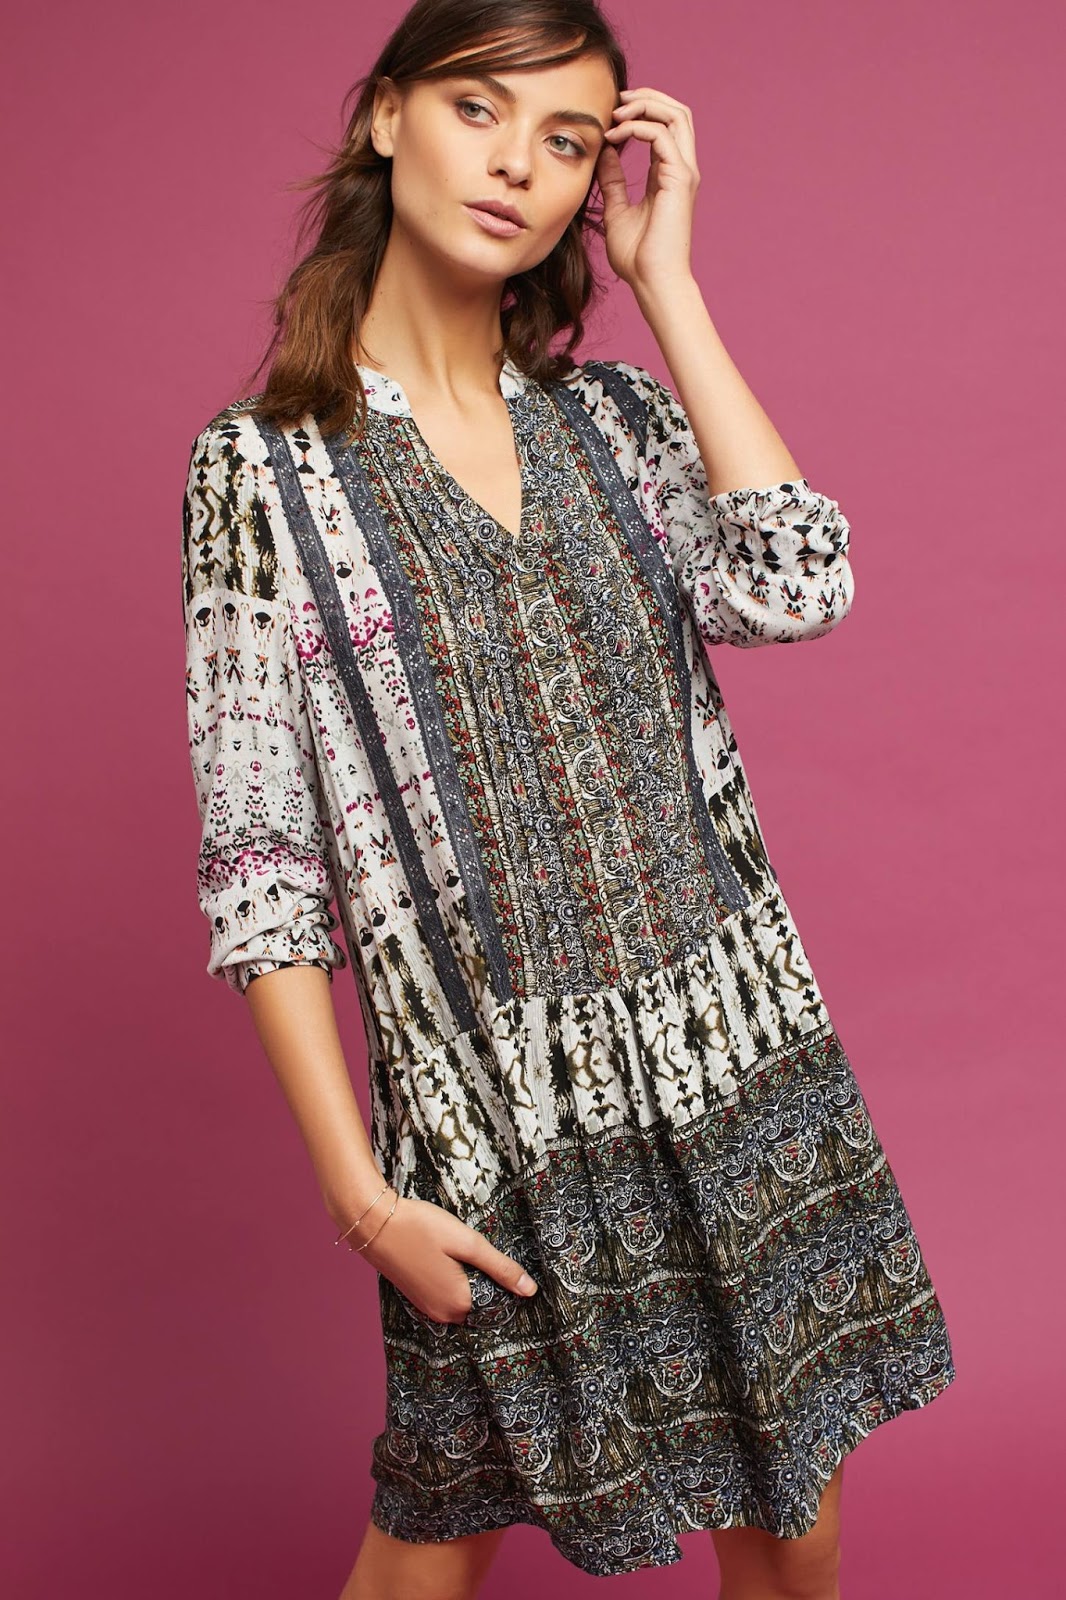 Quick reviews of 25+ Anthropologie dresses that are 20% off today ...